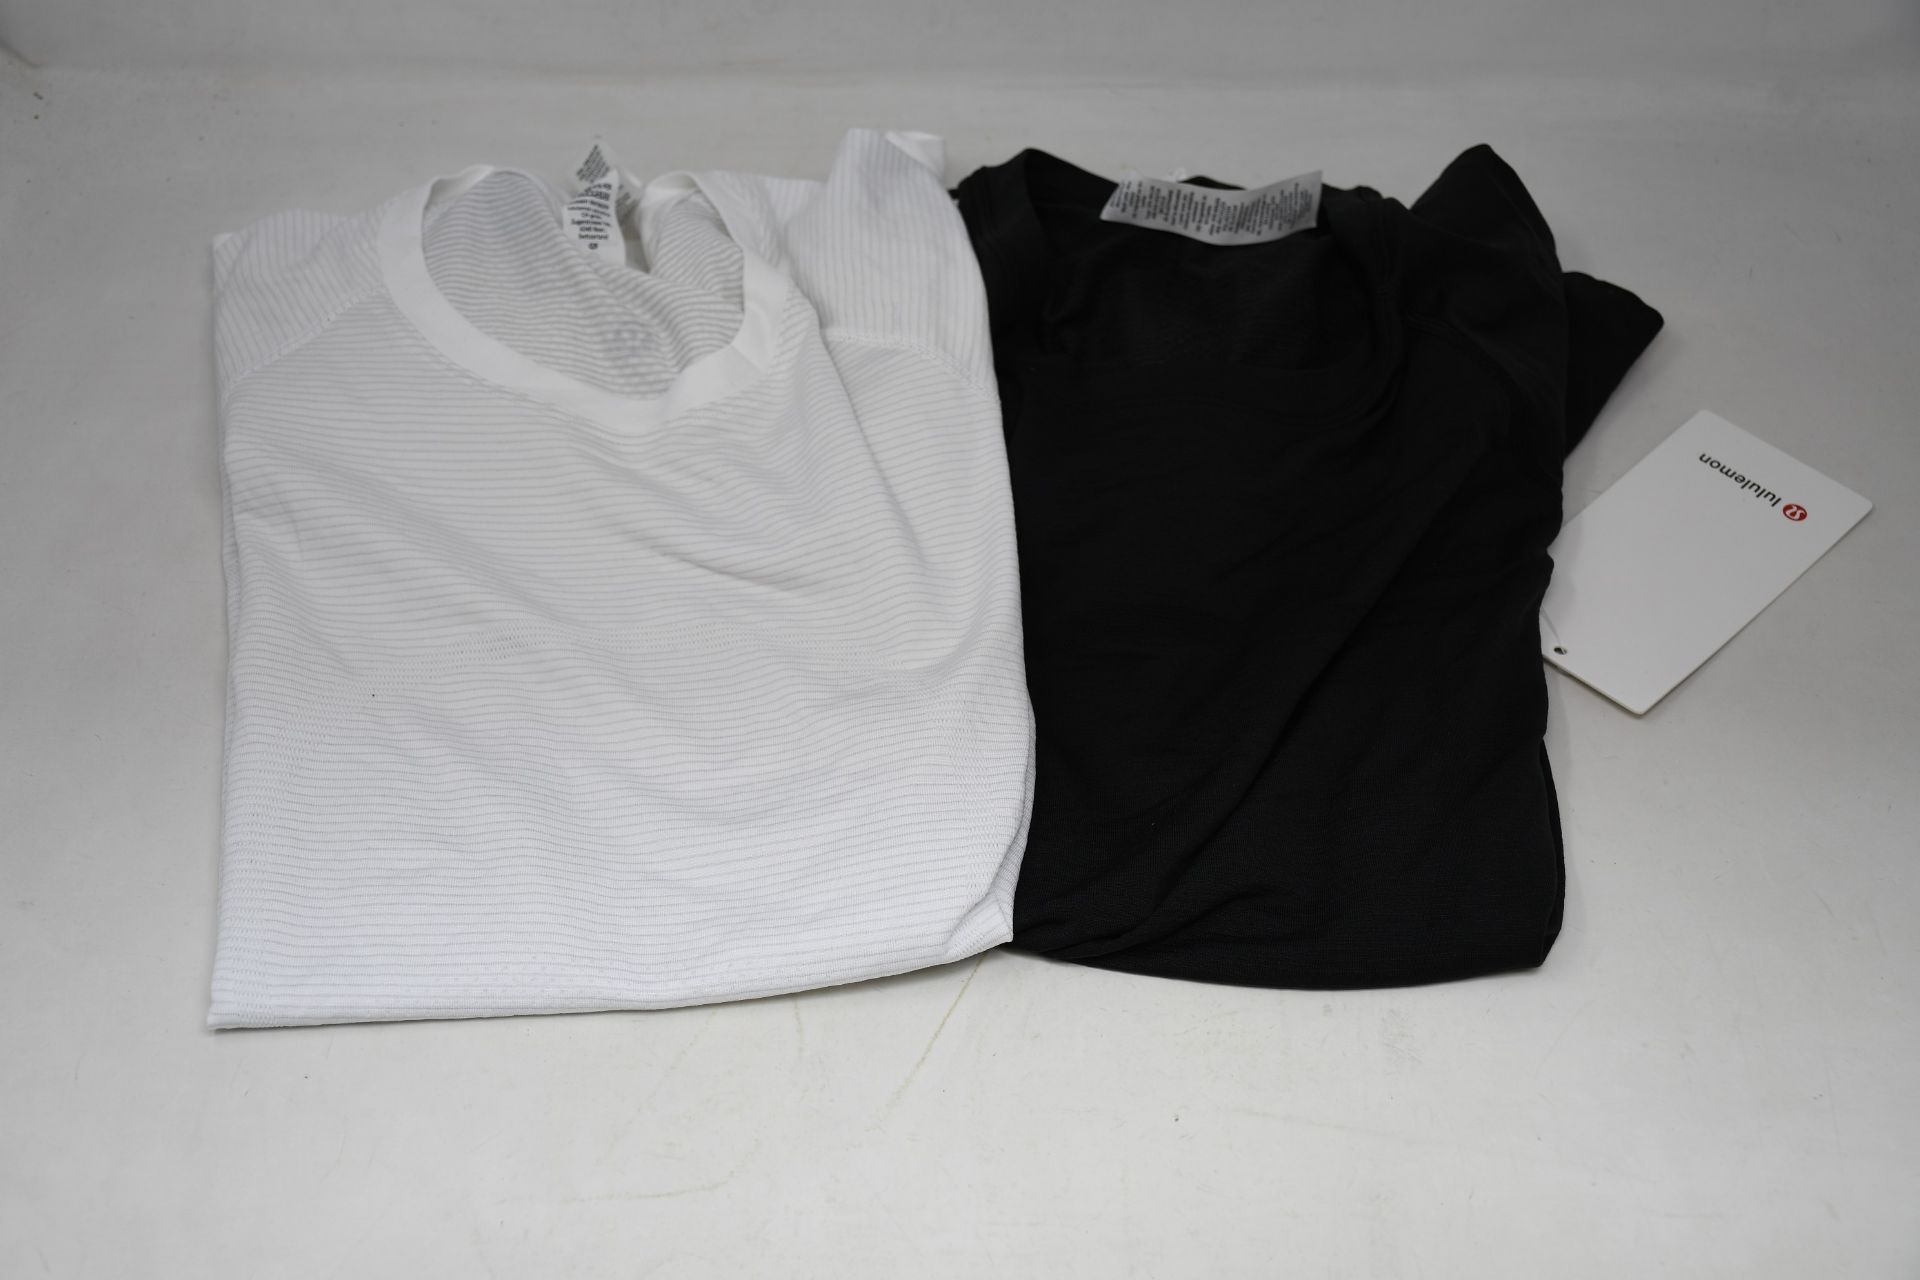 Four as new LuluLemon Swiftly tech long sleeve tops (Sizes 2 x 4, 6, 8 - RRP £68 each, please note